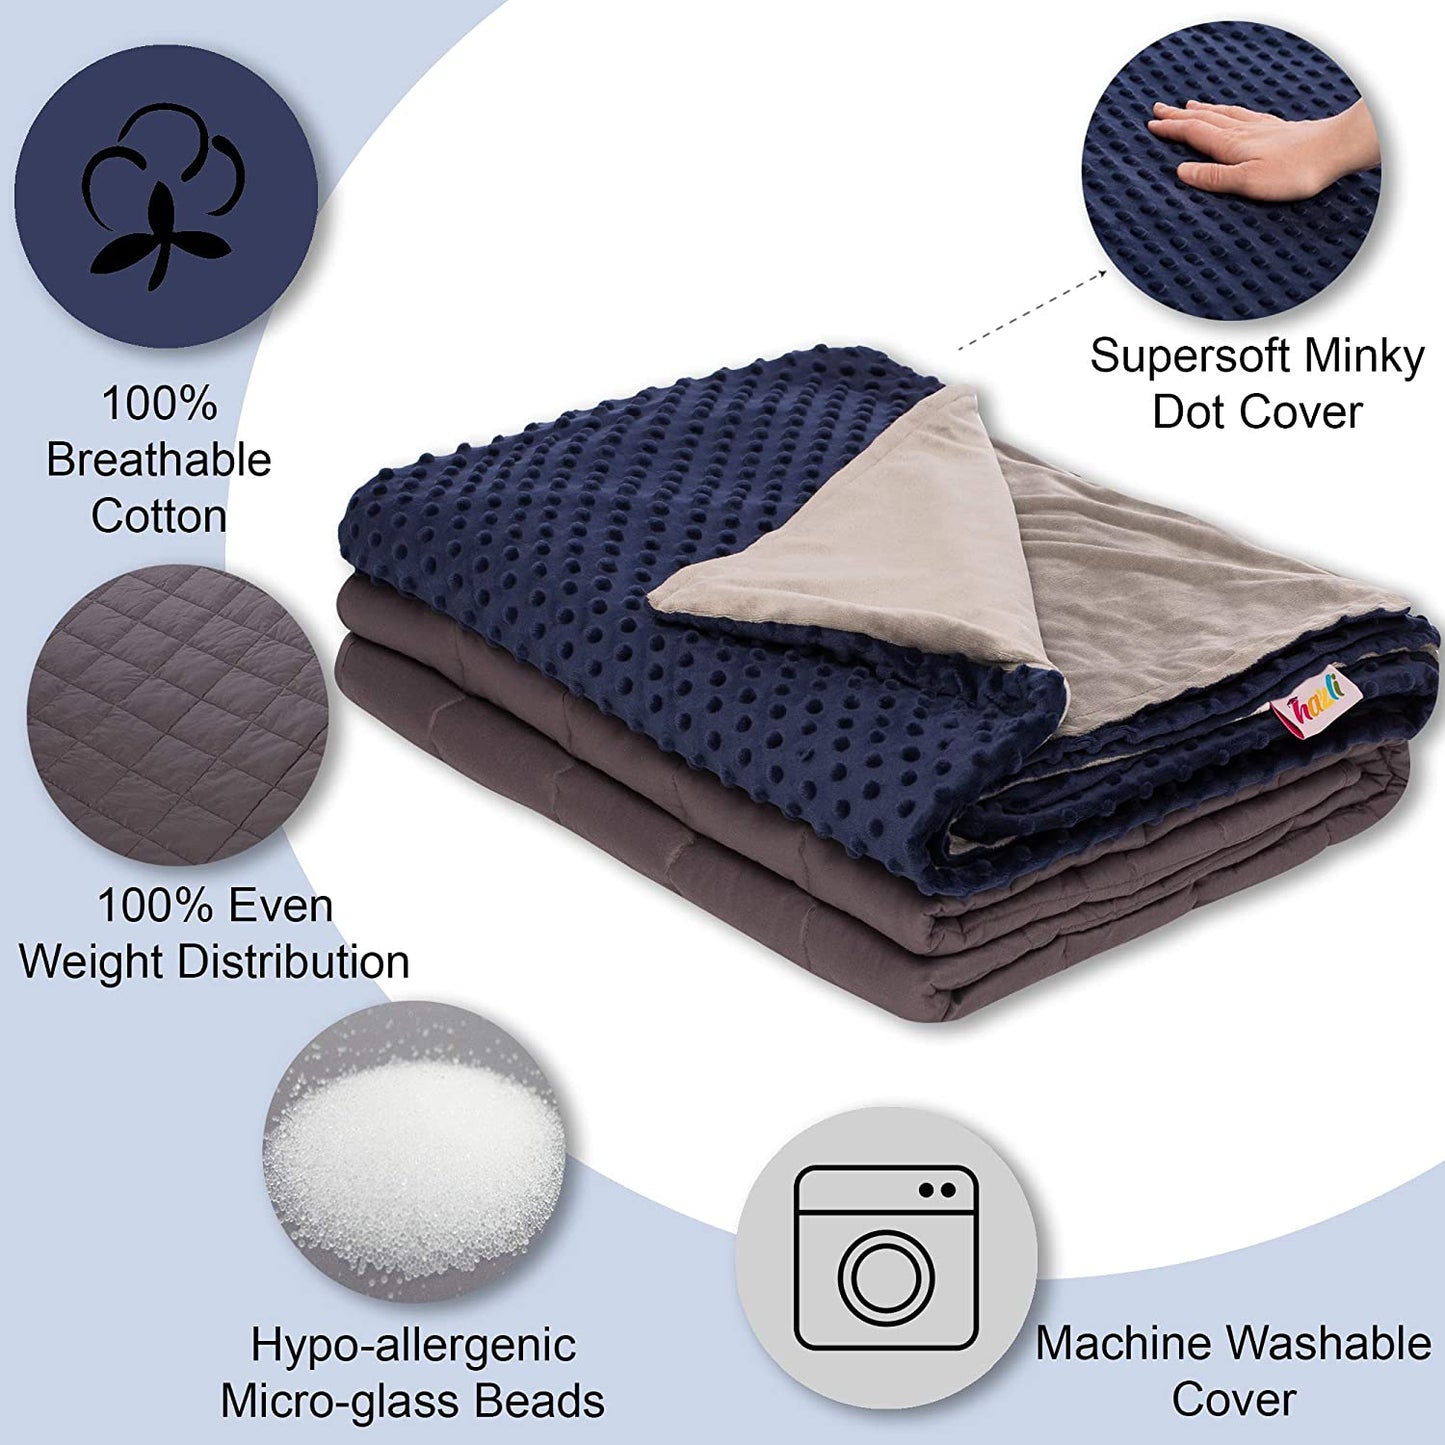 Super Soft 10 lbs Weighted Blanket for Kids & Removable Cover - 41 x 60 inch Weighted Blankets with Glass Beads Single Size - Kids Heavy Blanket for Boys - Navy Blue - Hazli Collection 